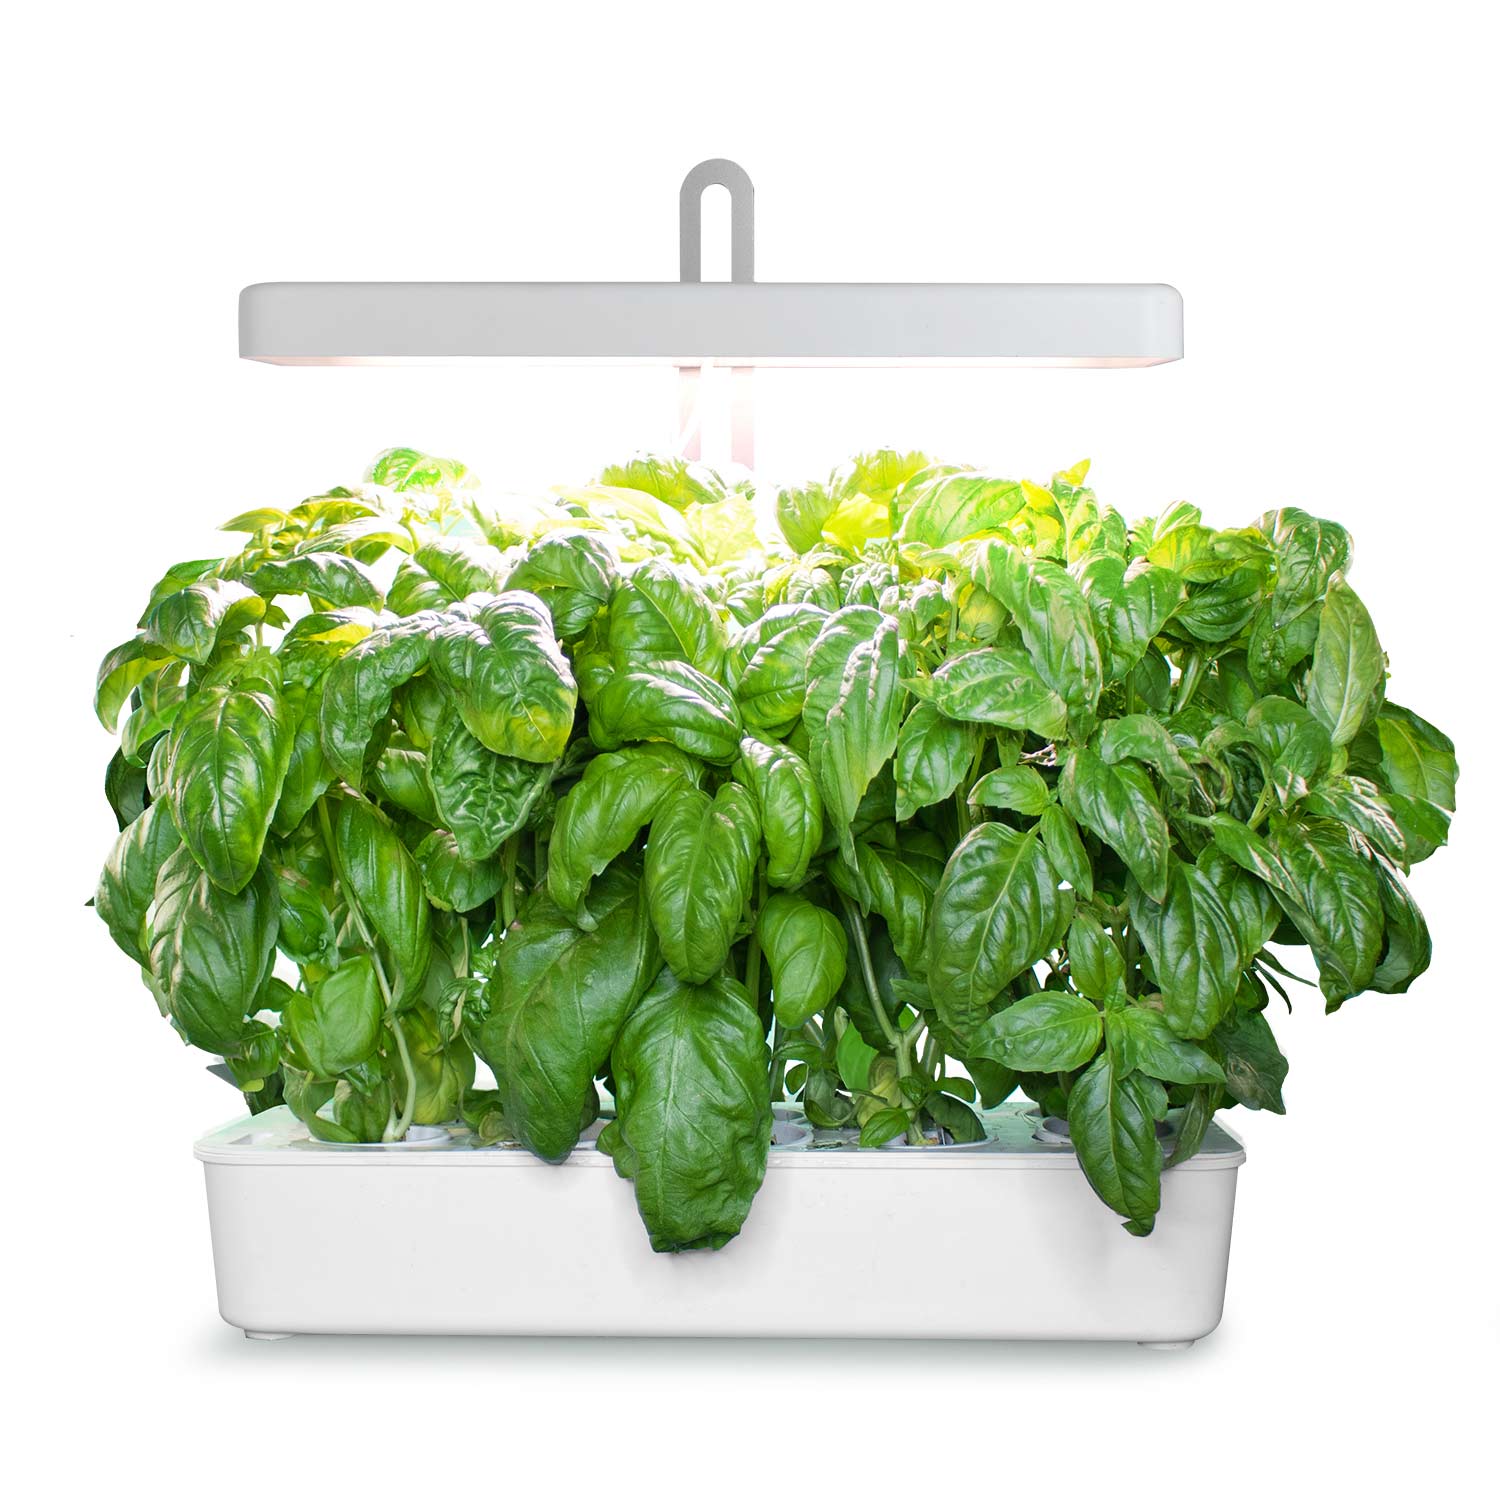 homemade hydroponic system manufacturer